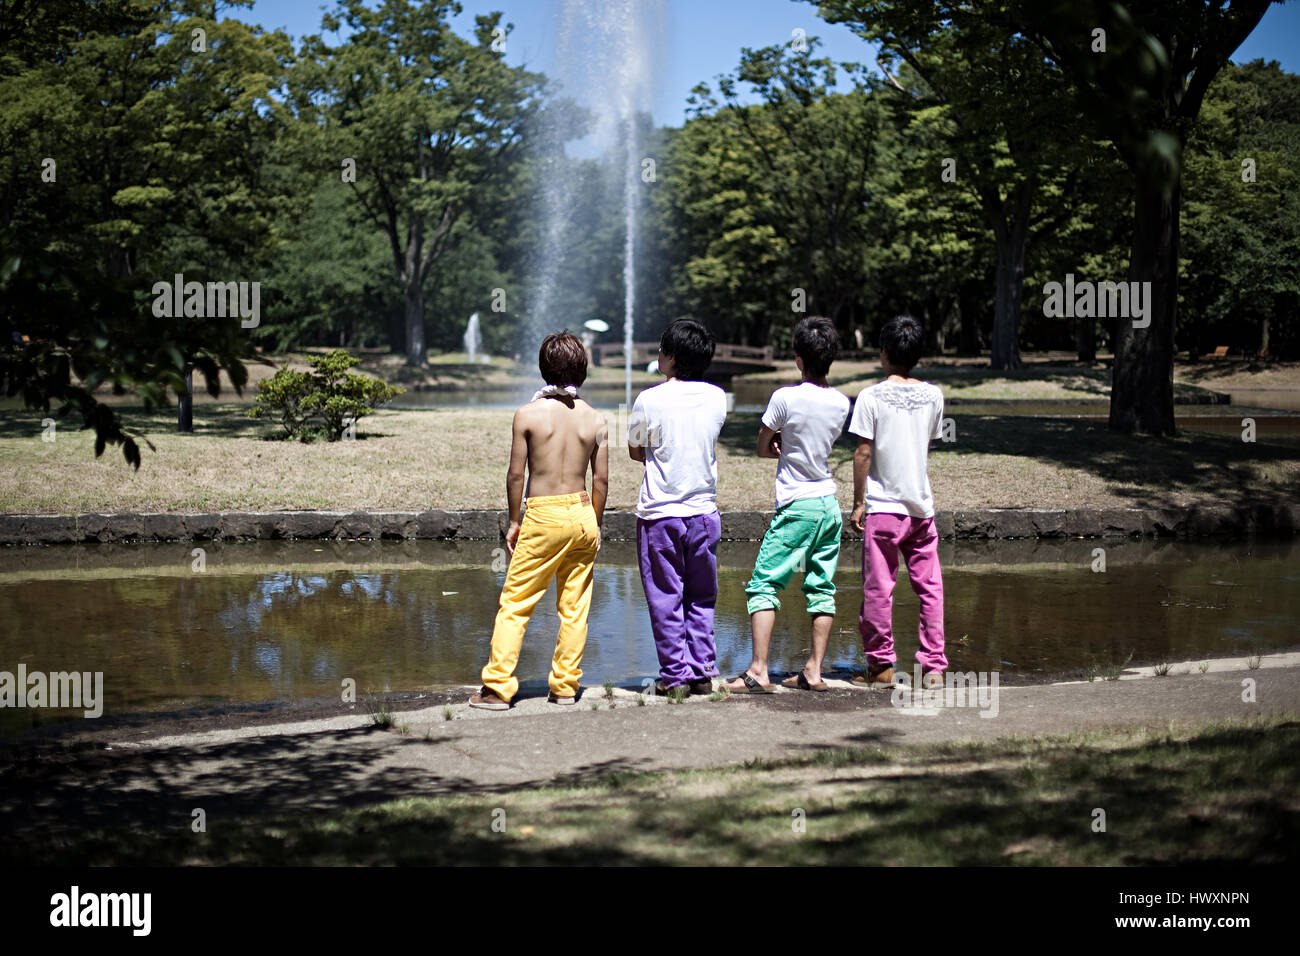 Four Japanese boys in colorful pants watching the water fountain in the Yoyogi Park in Tokyo, Japan. Stock Photo